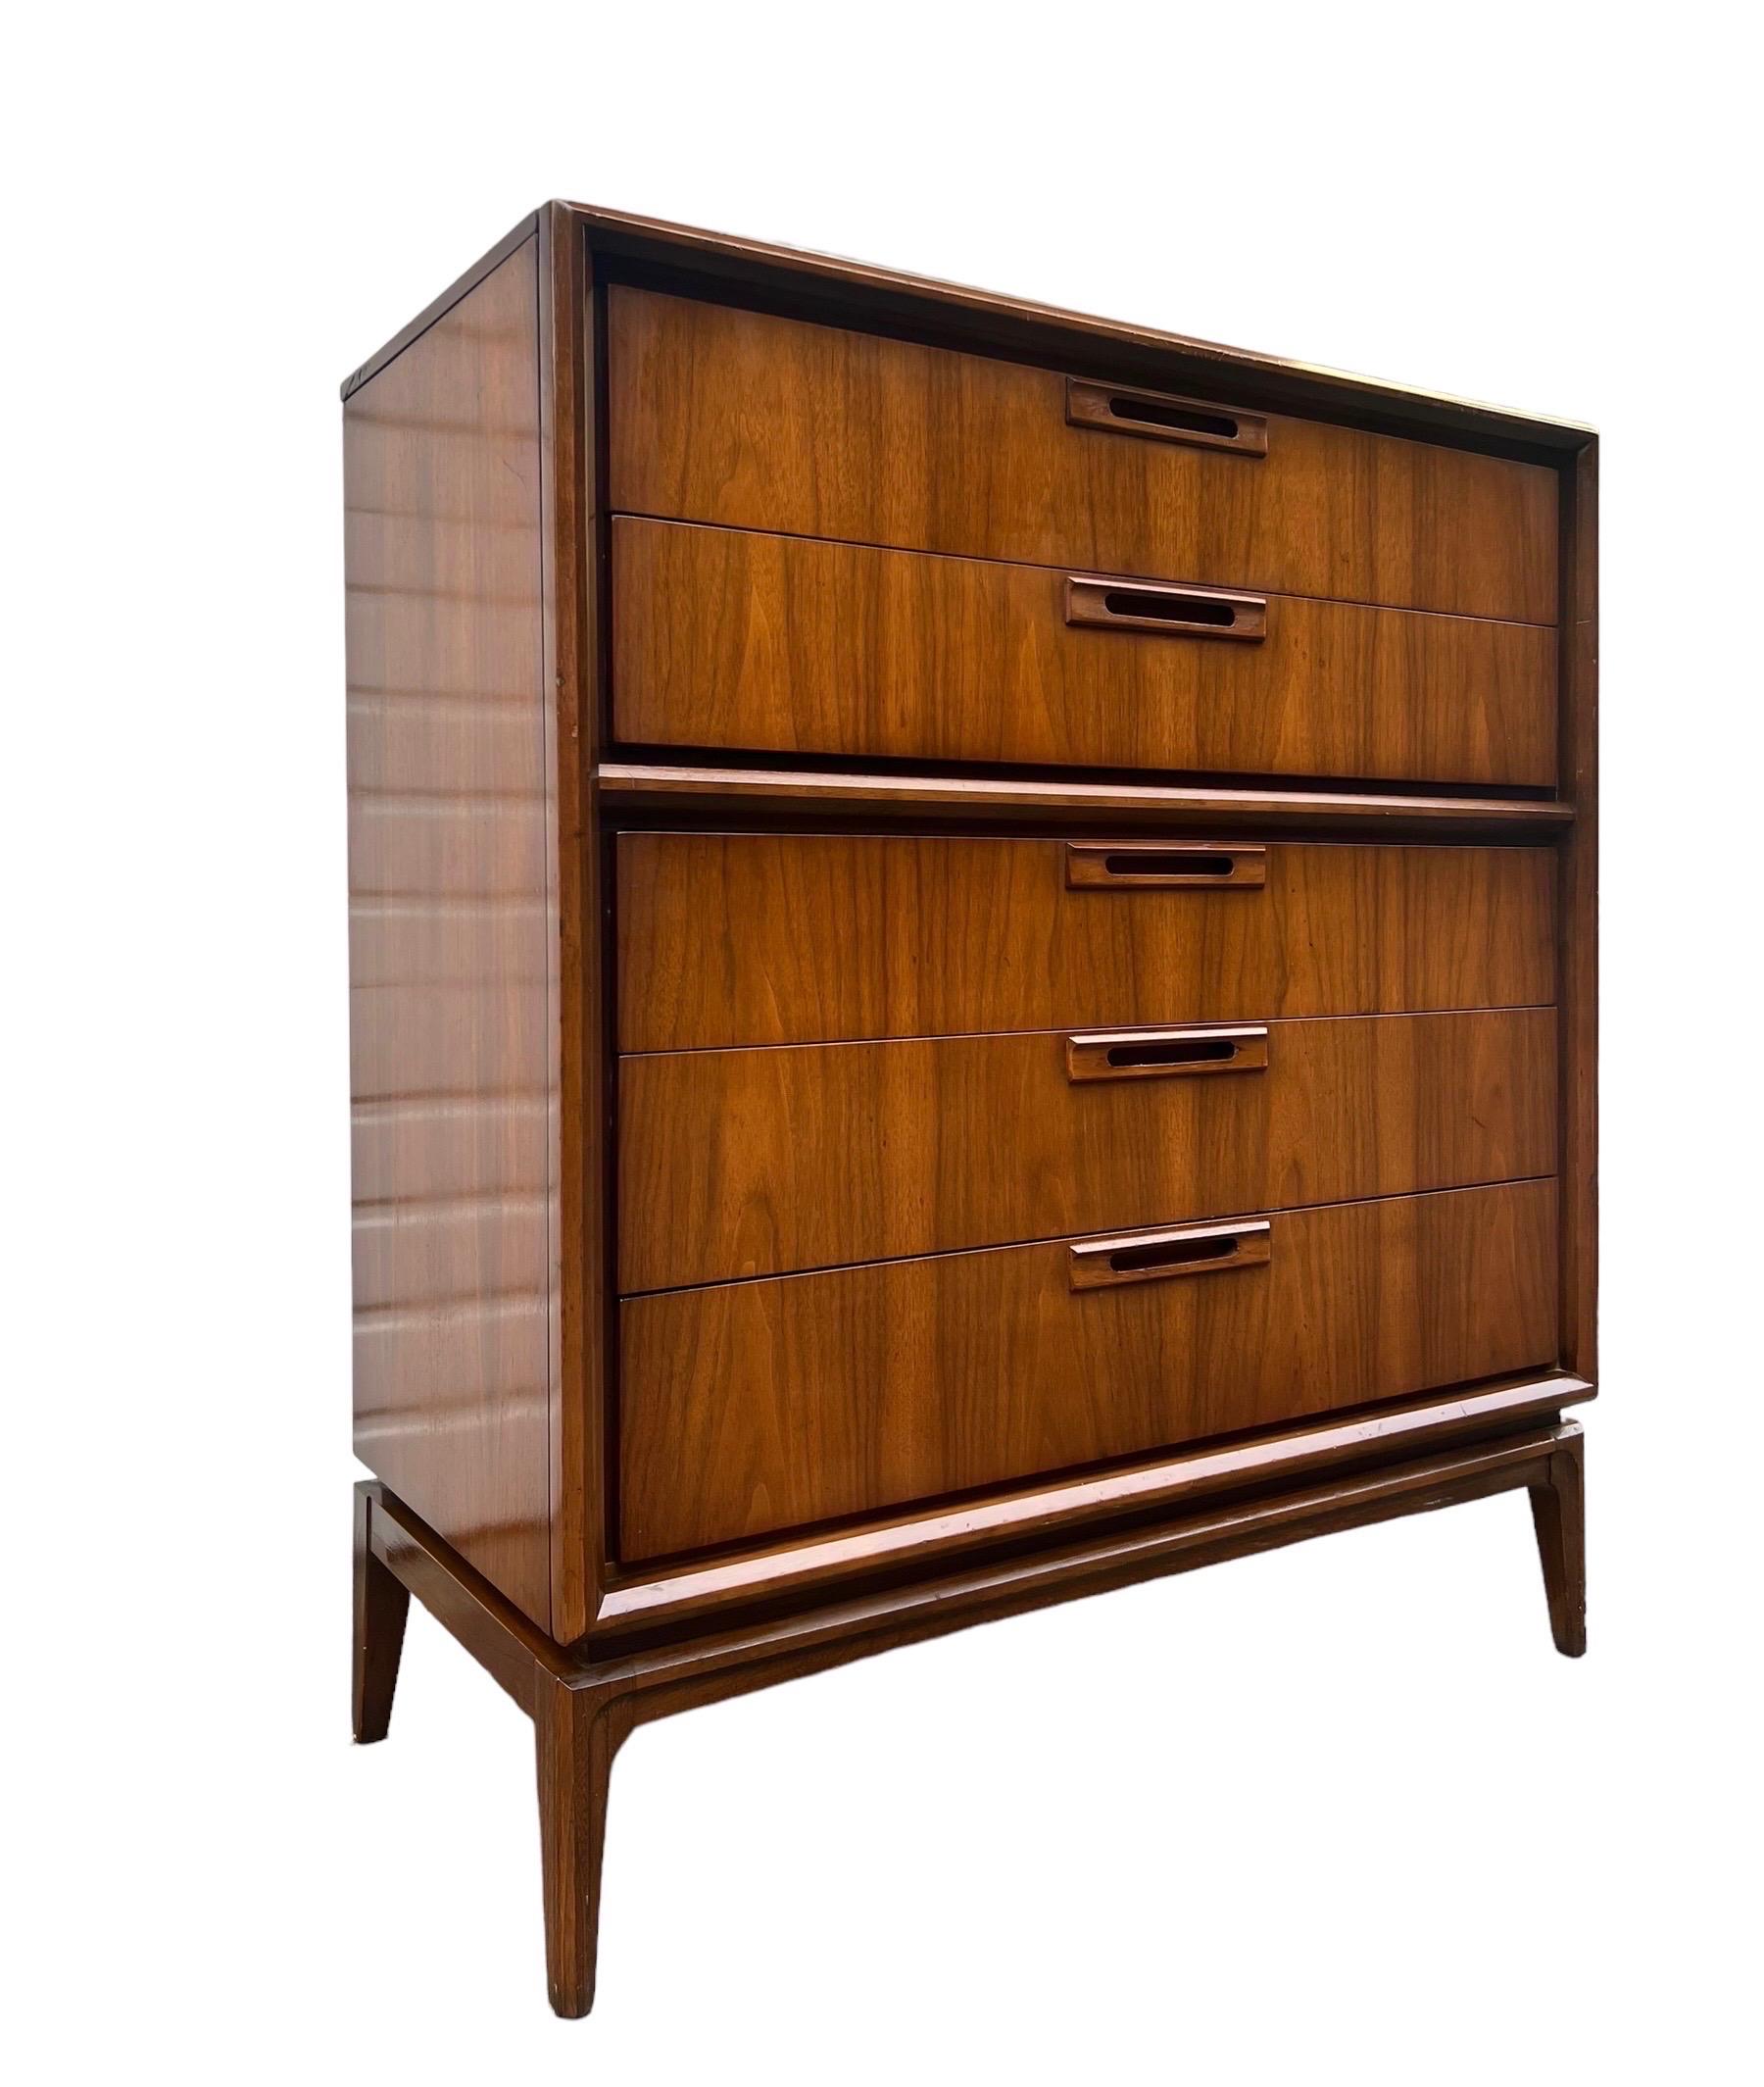 Fin du 20e siècle Vintage Mid Century Modern Solid Walnut Dovetail Drawers by Stanley  en vente